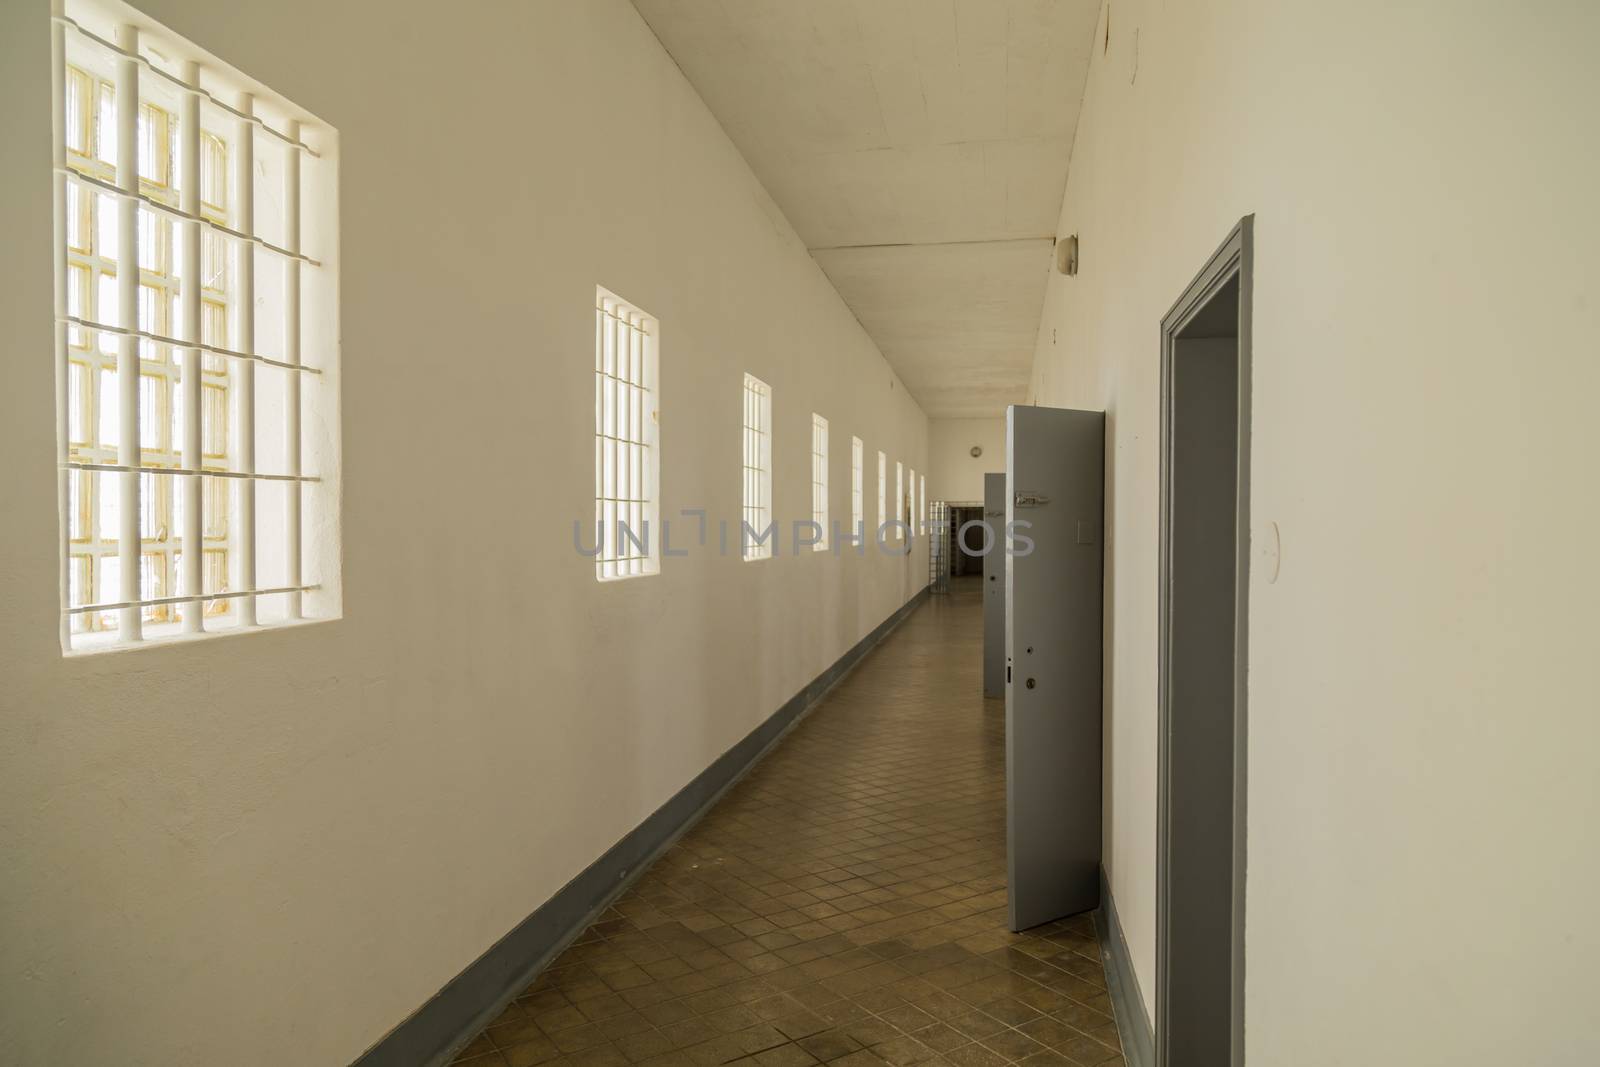 Interior of the old political prison by zittto